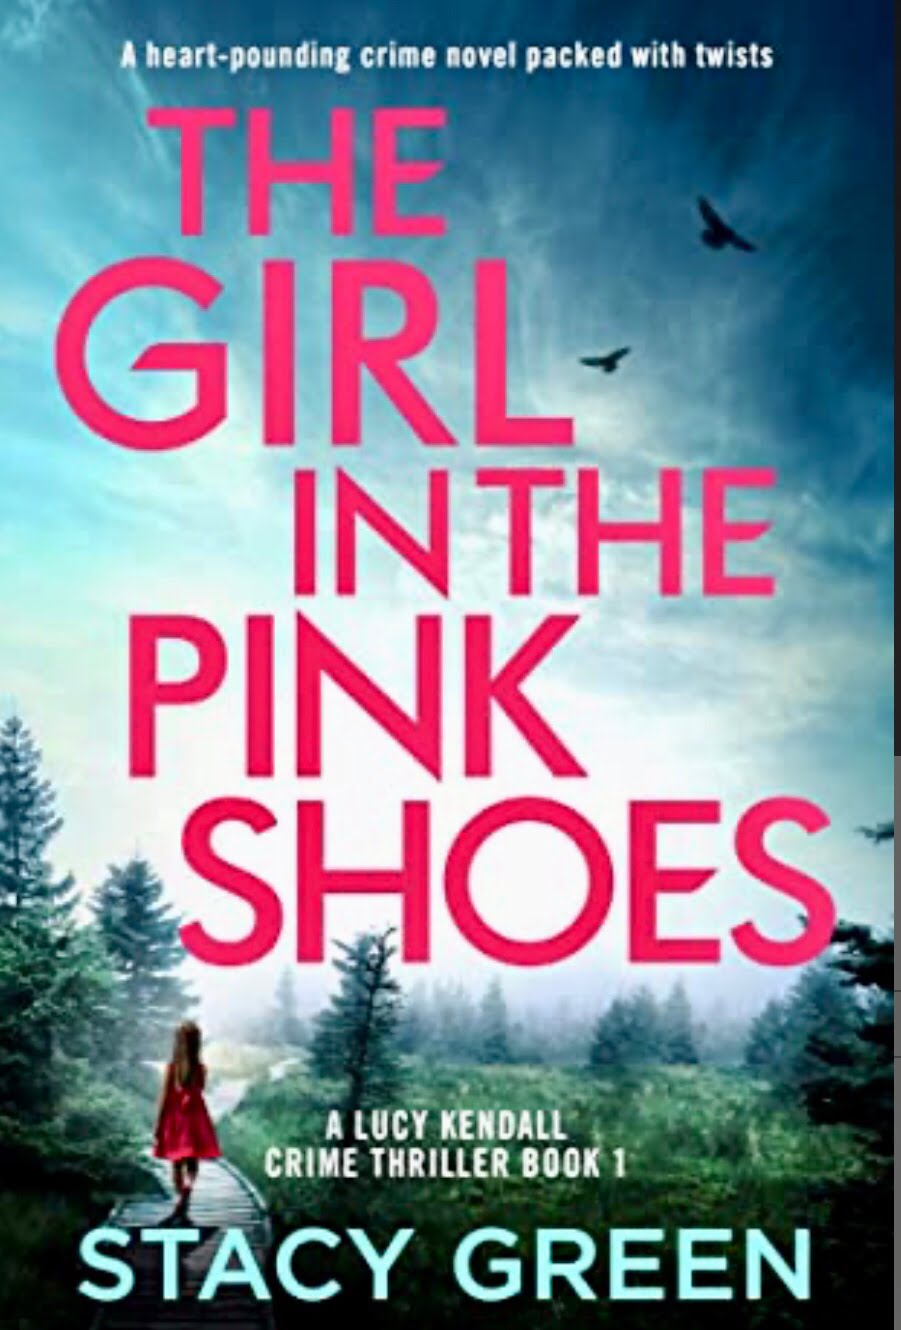 THE GIRL IN THE PINK SHOES BY STACY GREEN – BOOK REVIEW